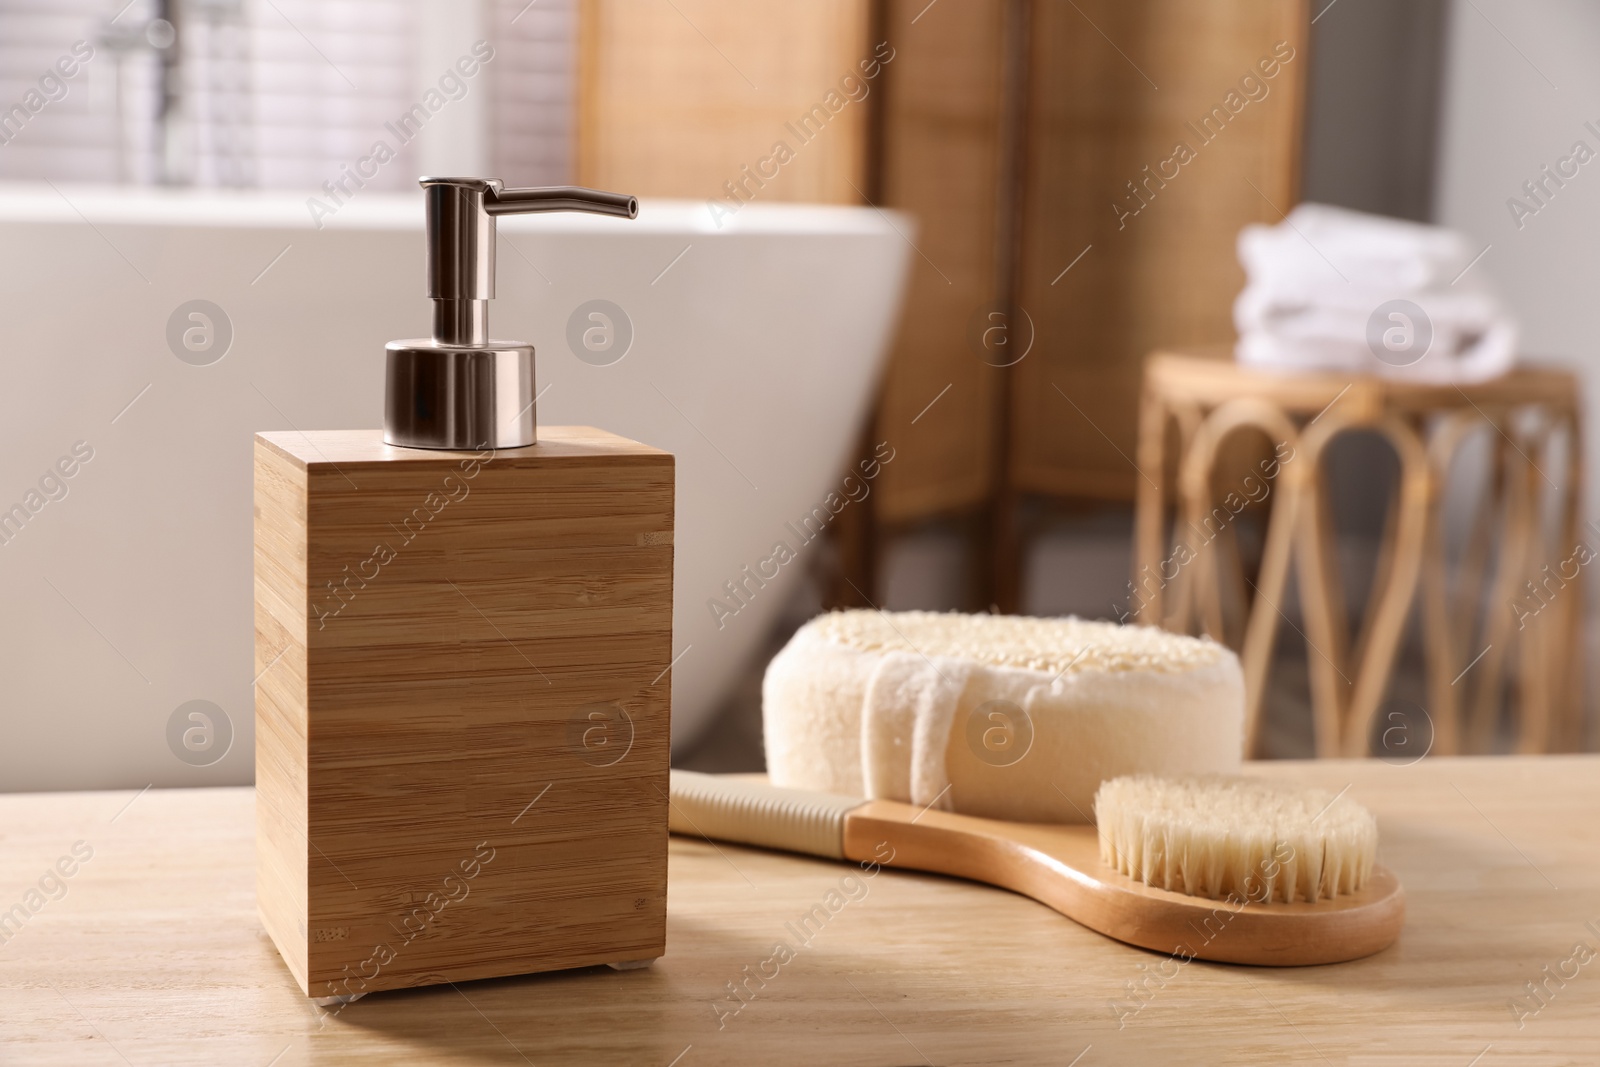 Photo of Dispenser of liquid soap, brush and loofah on wooden table in bathroom, space for text